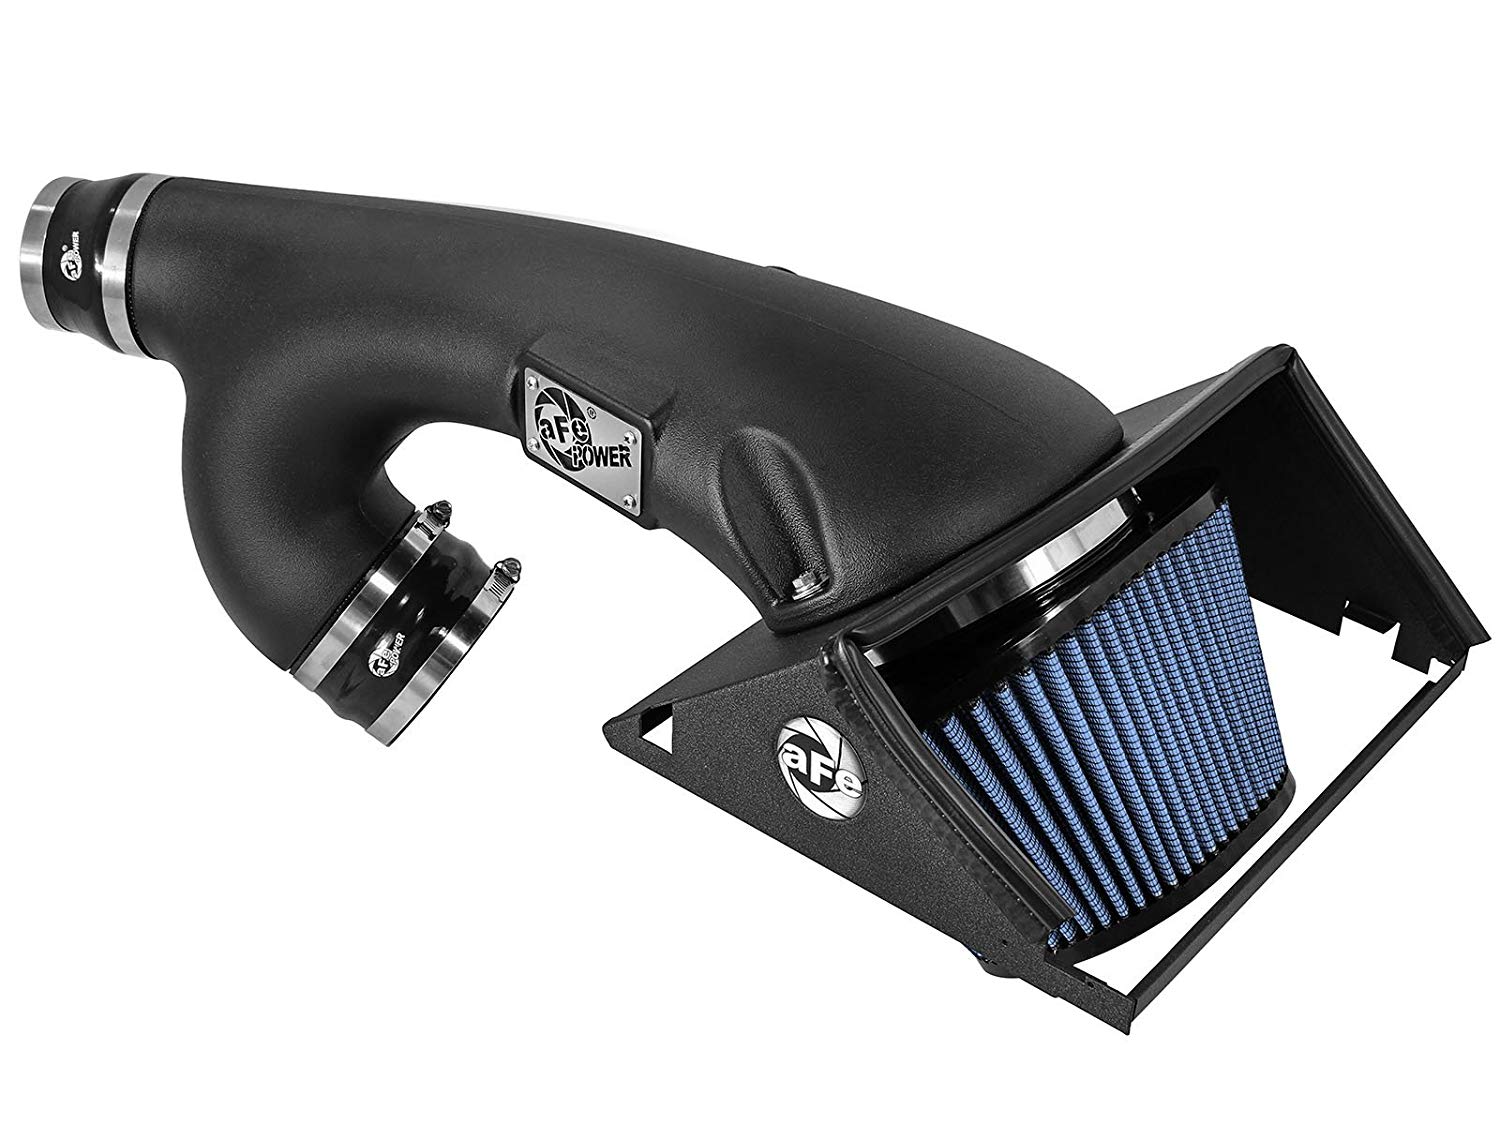 aFe Power Performance Intake System - Winner Best Cold Air Intake for F150 Ecoboost